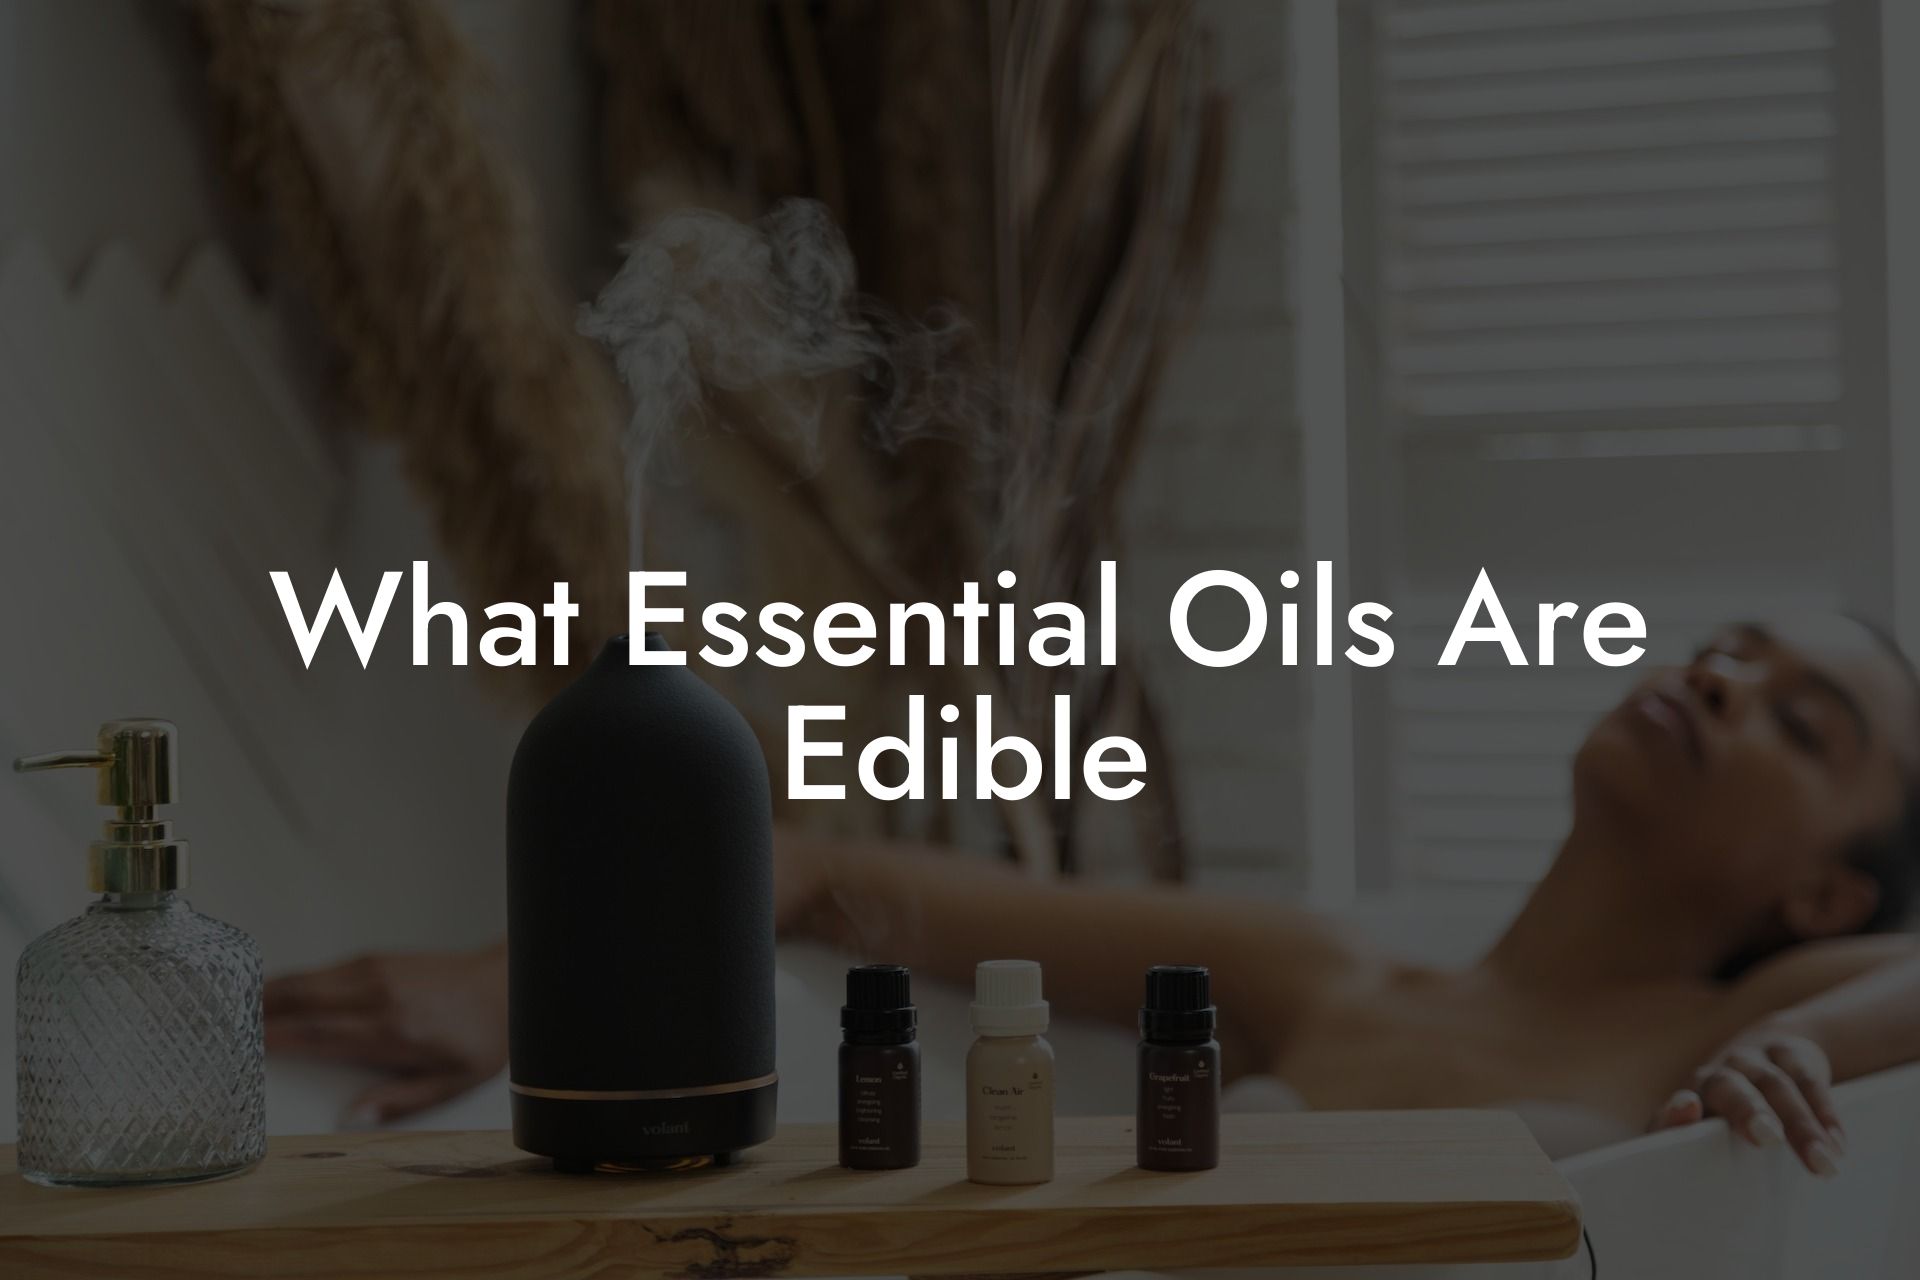 What Essential Oils Are Edible